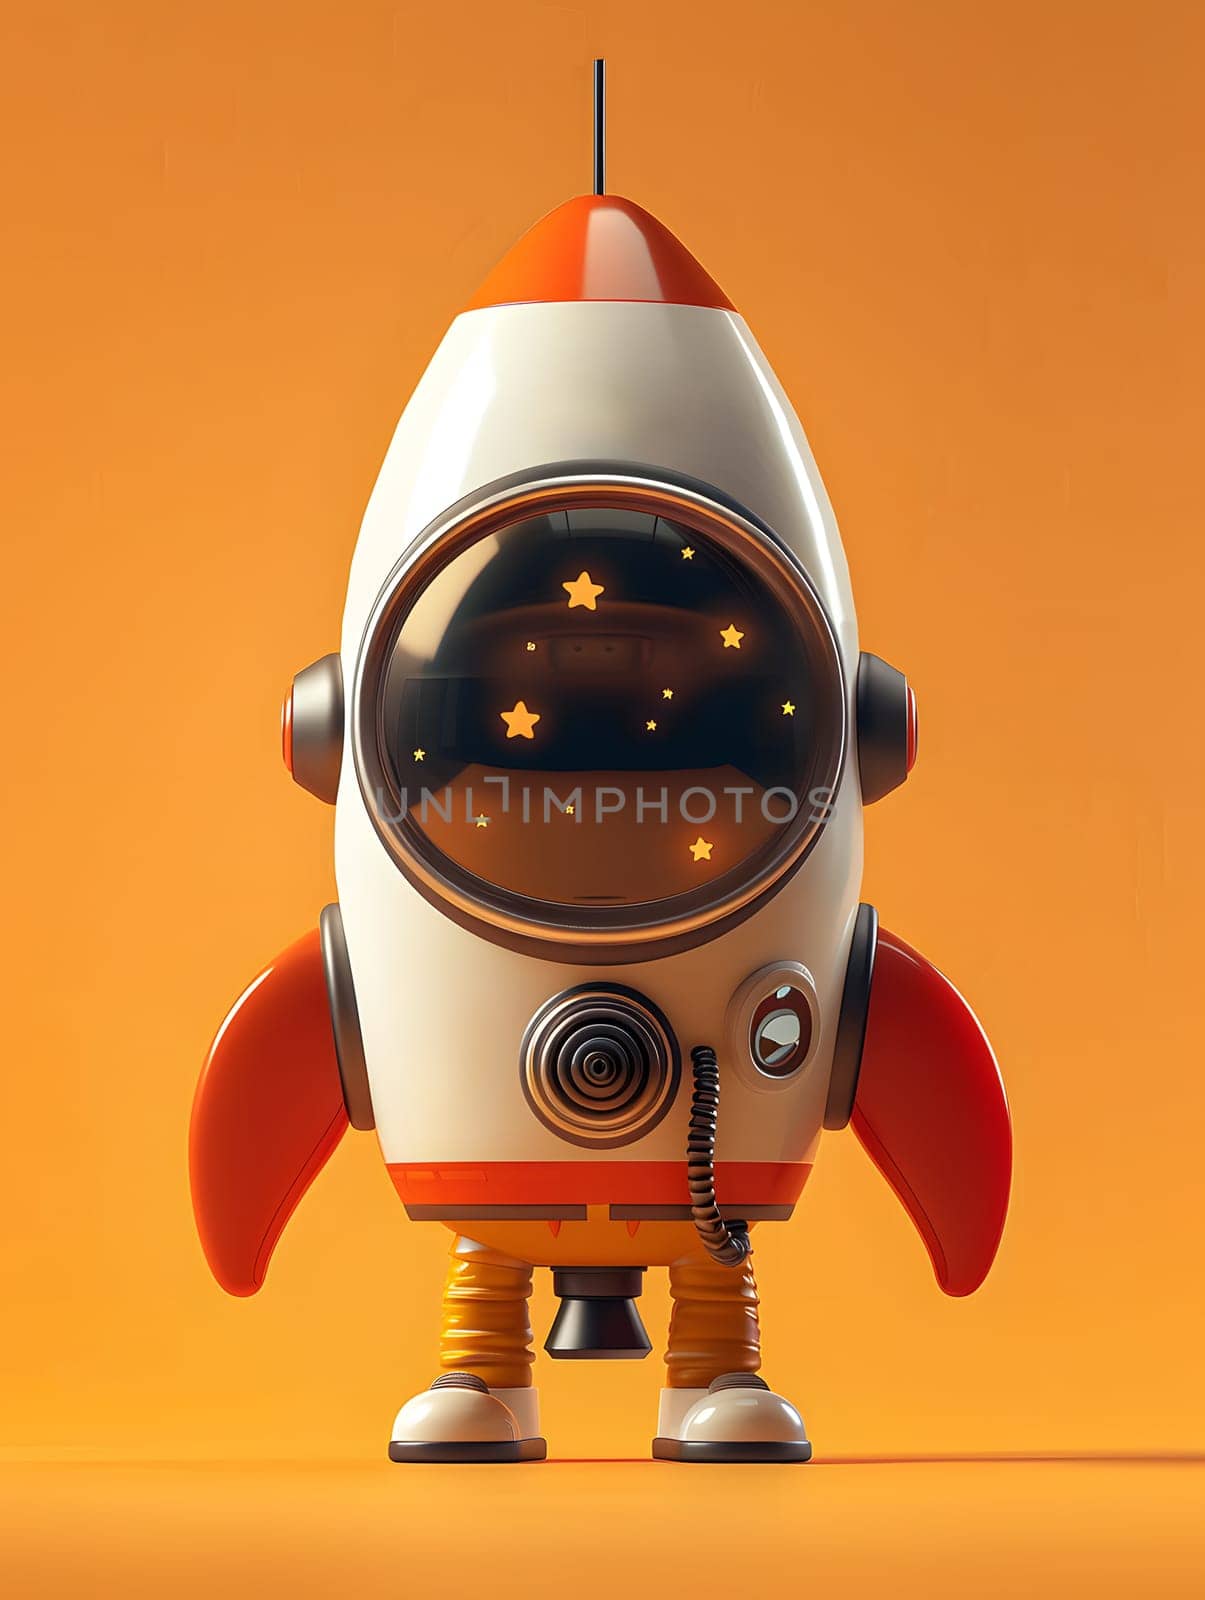 Toy rocket with helmet on, standing on orange background by Nadtochiy